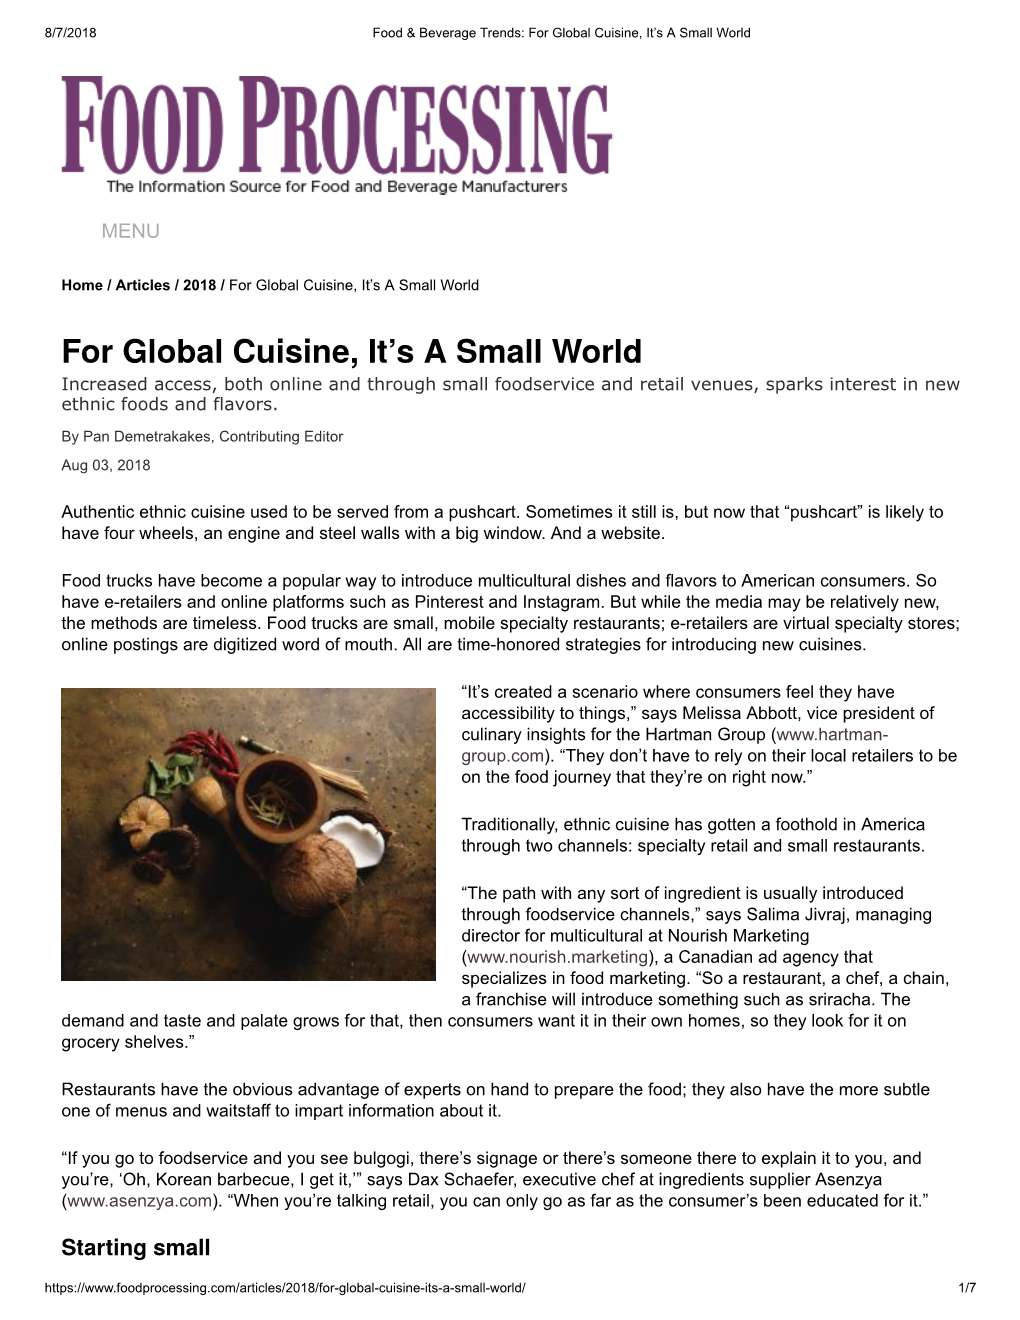 For Global Cuisine, It's a Small World